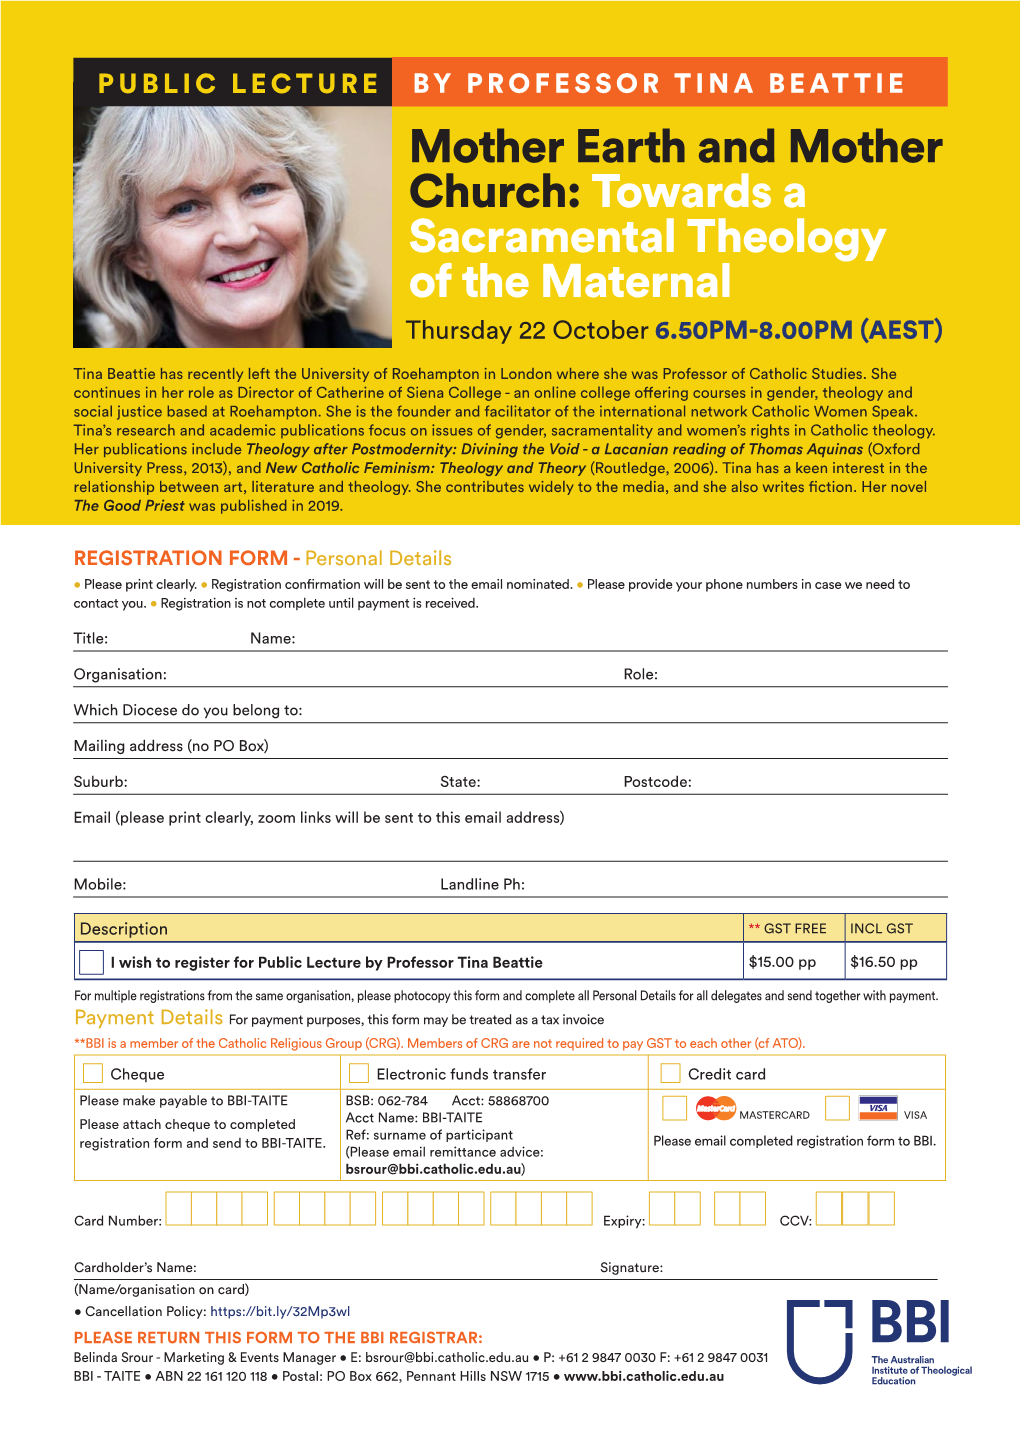 Mother Earth and Mother Church: Towards a Sacramental Theology of the Maternal Thursday 22 October 6.50PM-8.00PM (AEST)